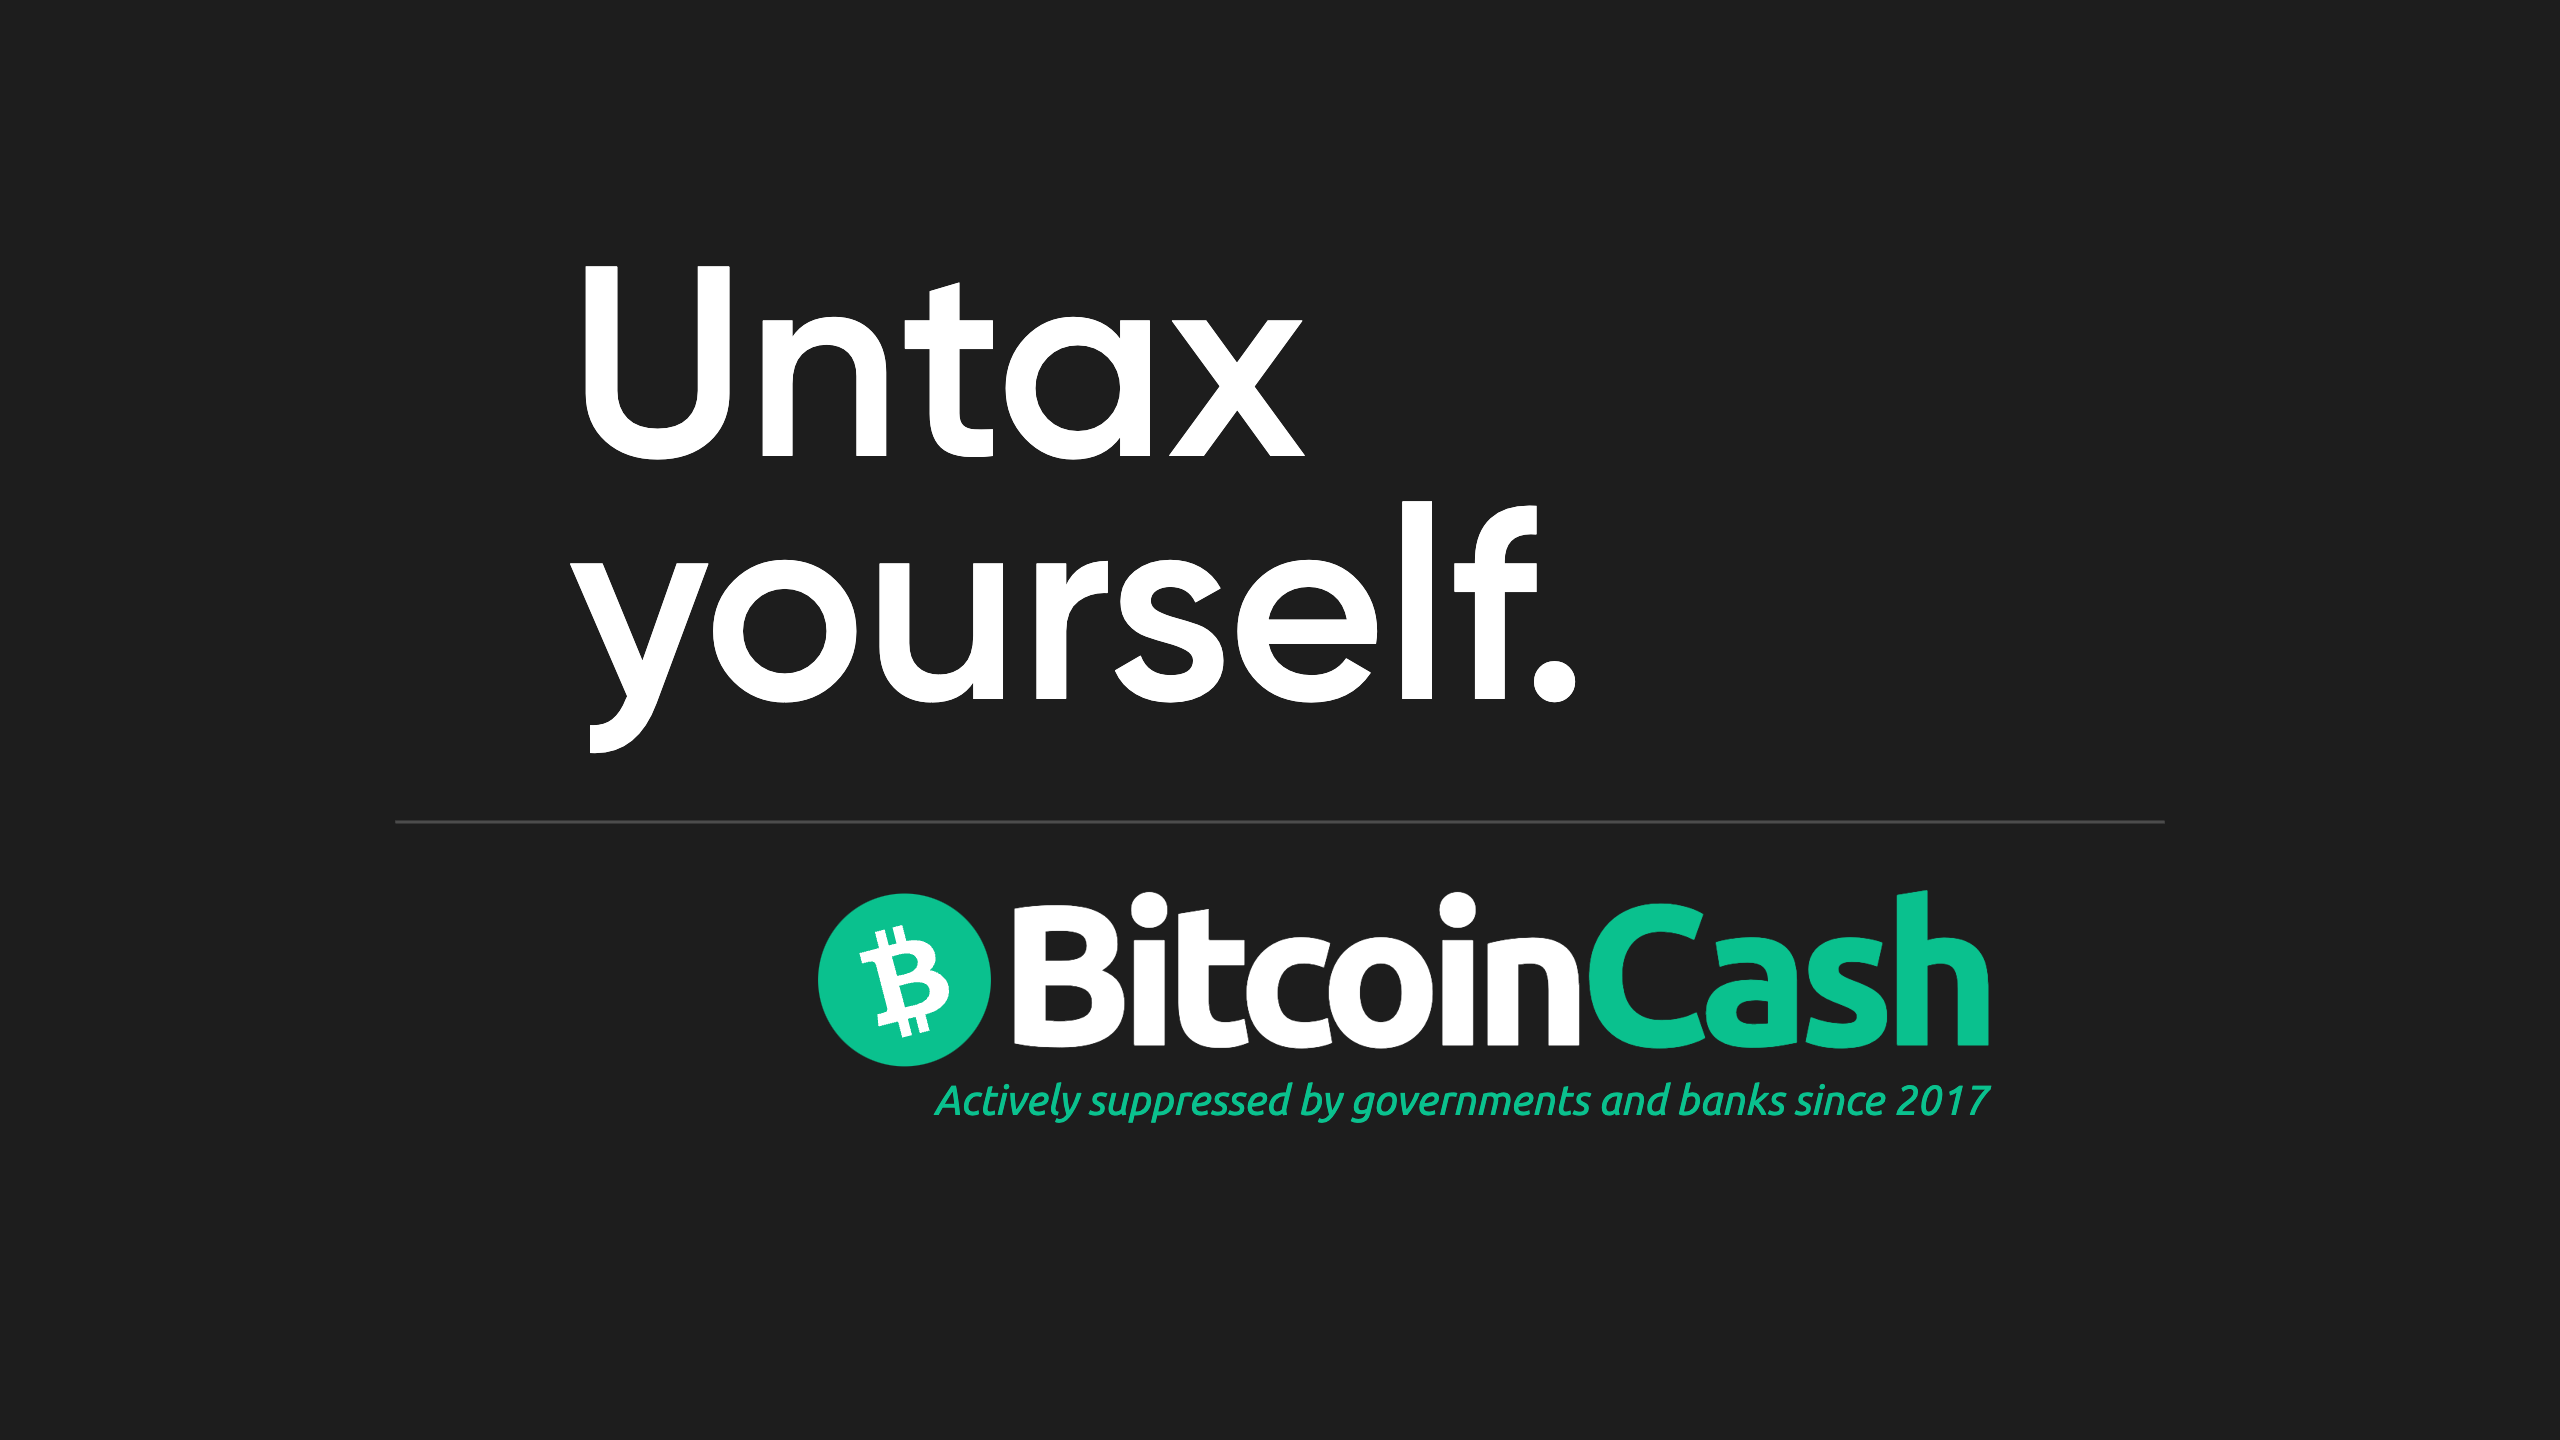 Untax yourself